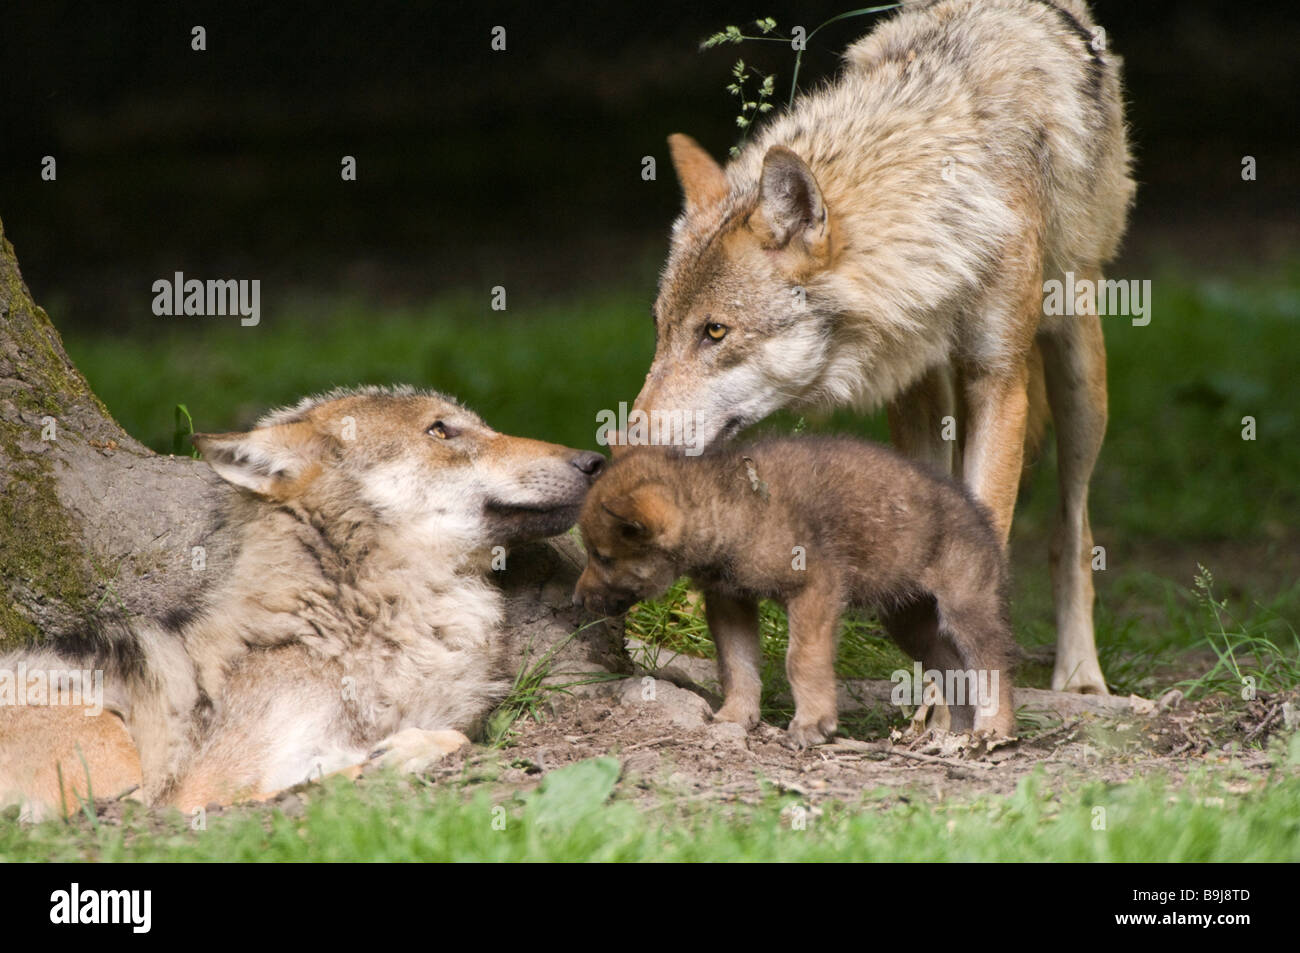 Gray wolves (Canis lupus), young animal, social behaviour, Sababurg zoo, Hofgeismar, North Hesse, Germany Stock Photo